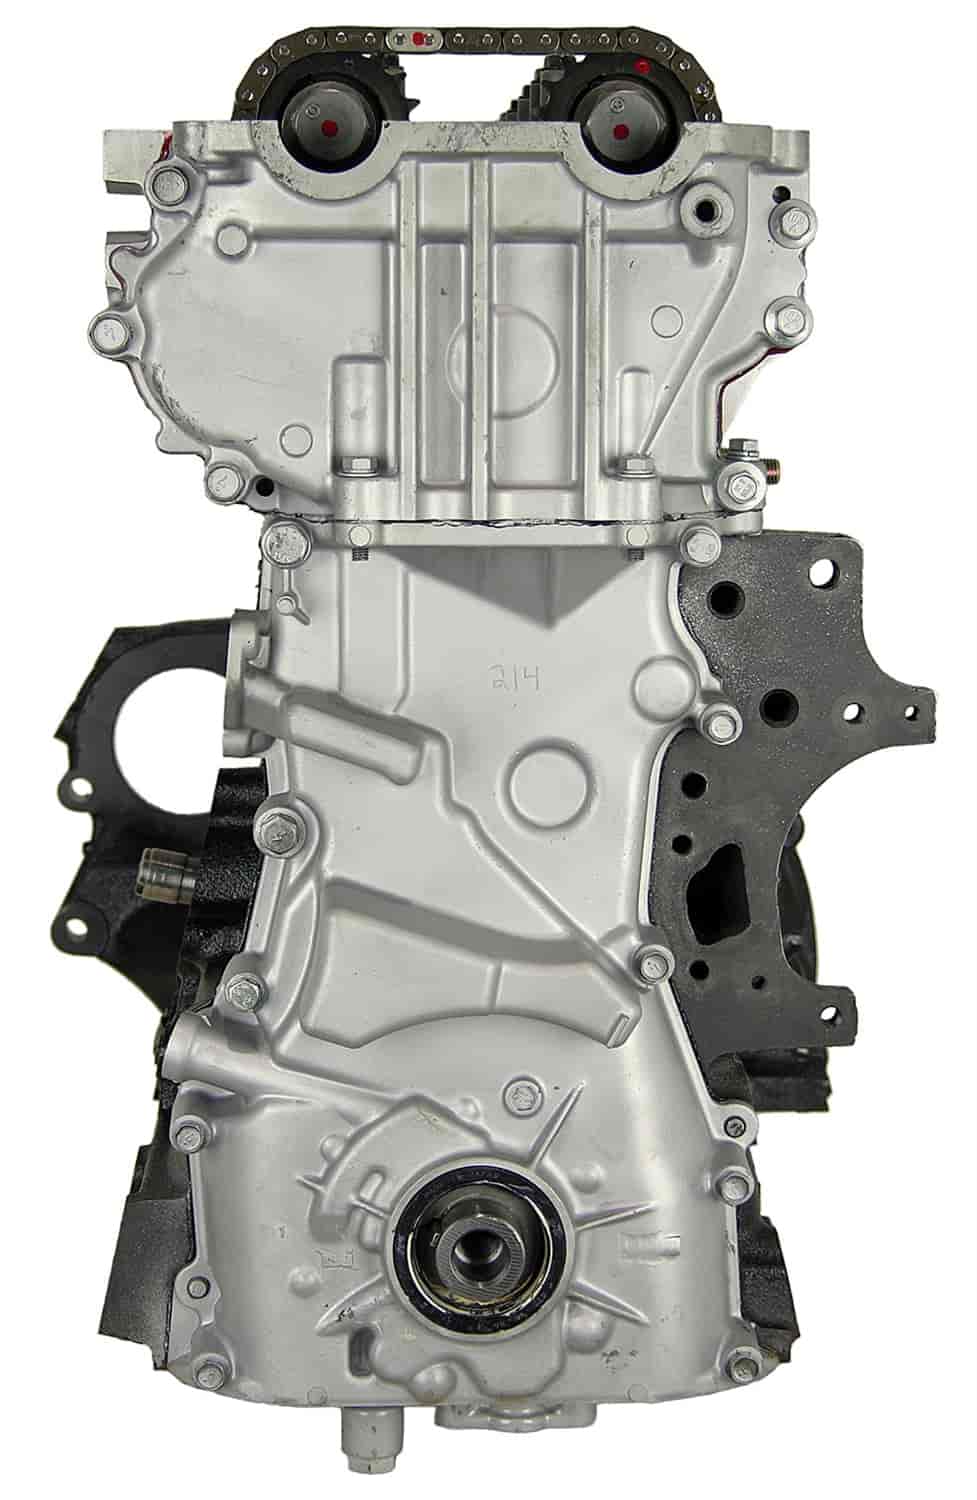 Remanufactured Crate Engine for 1999-20001 Nissan Altima with 2.4L L4 KA24DE